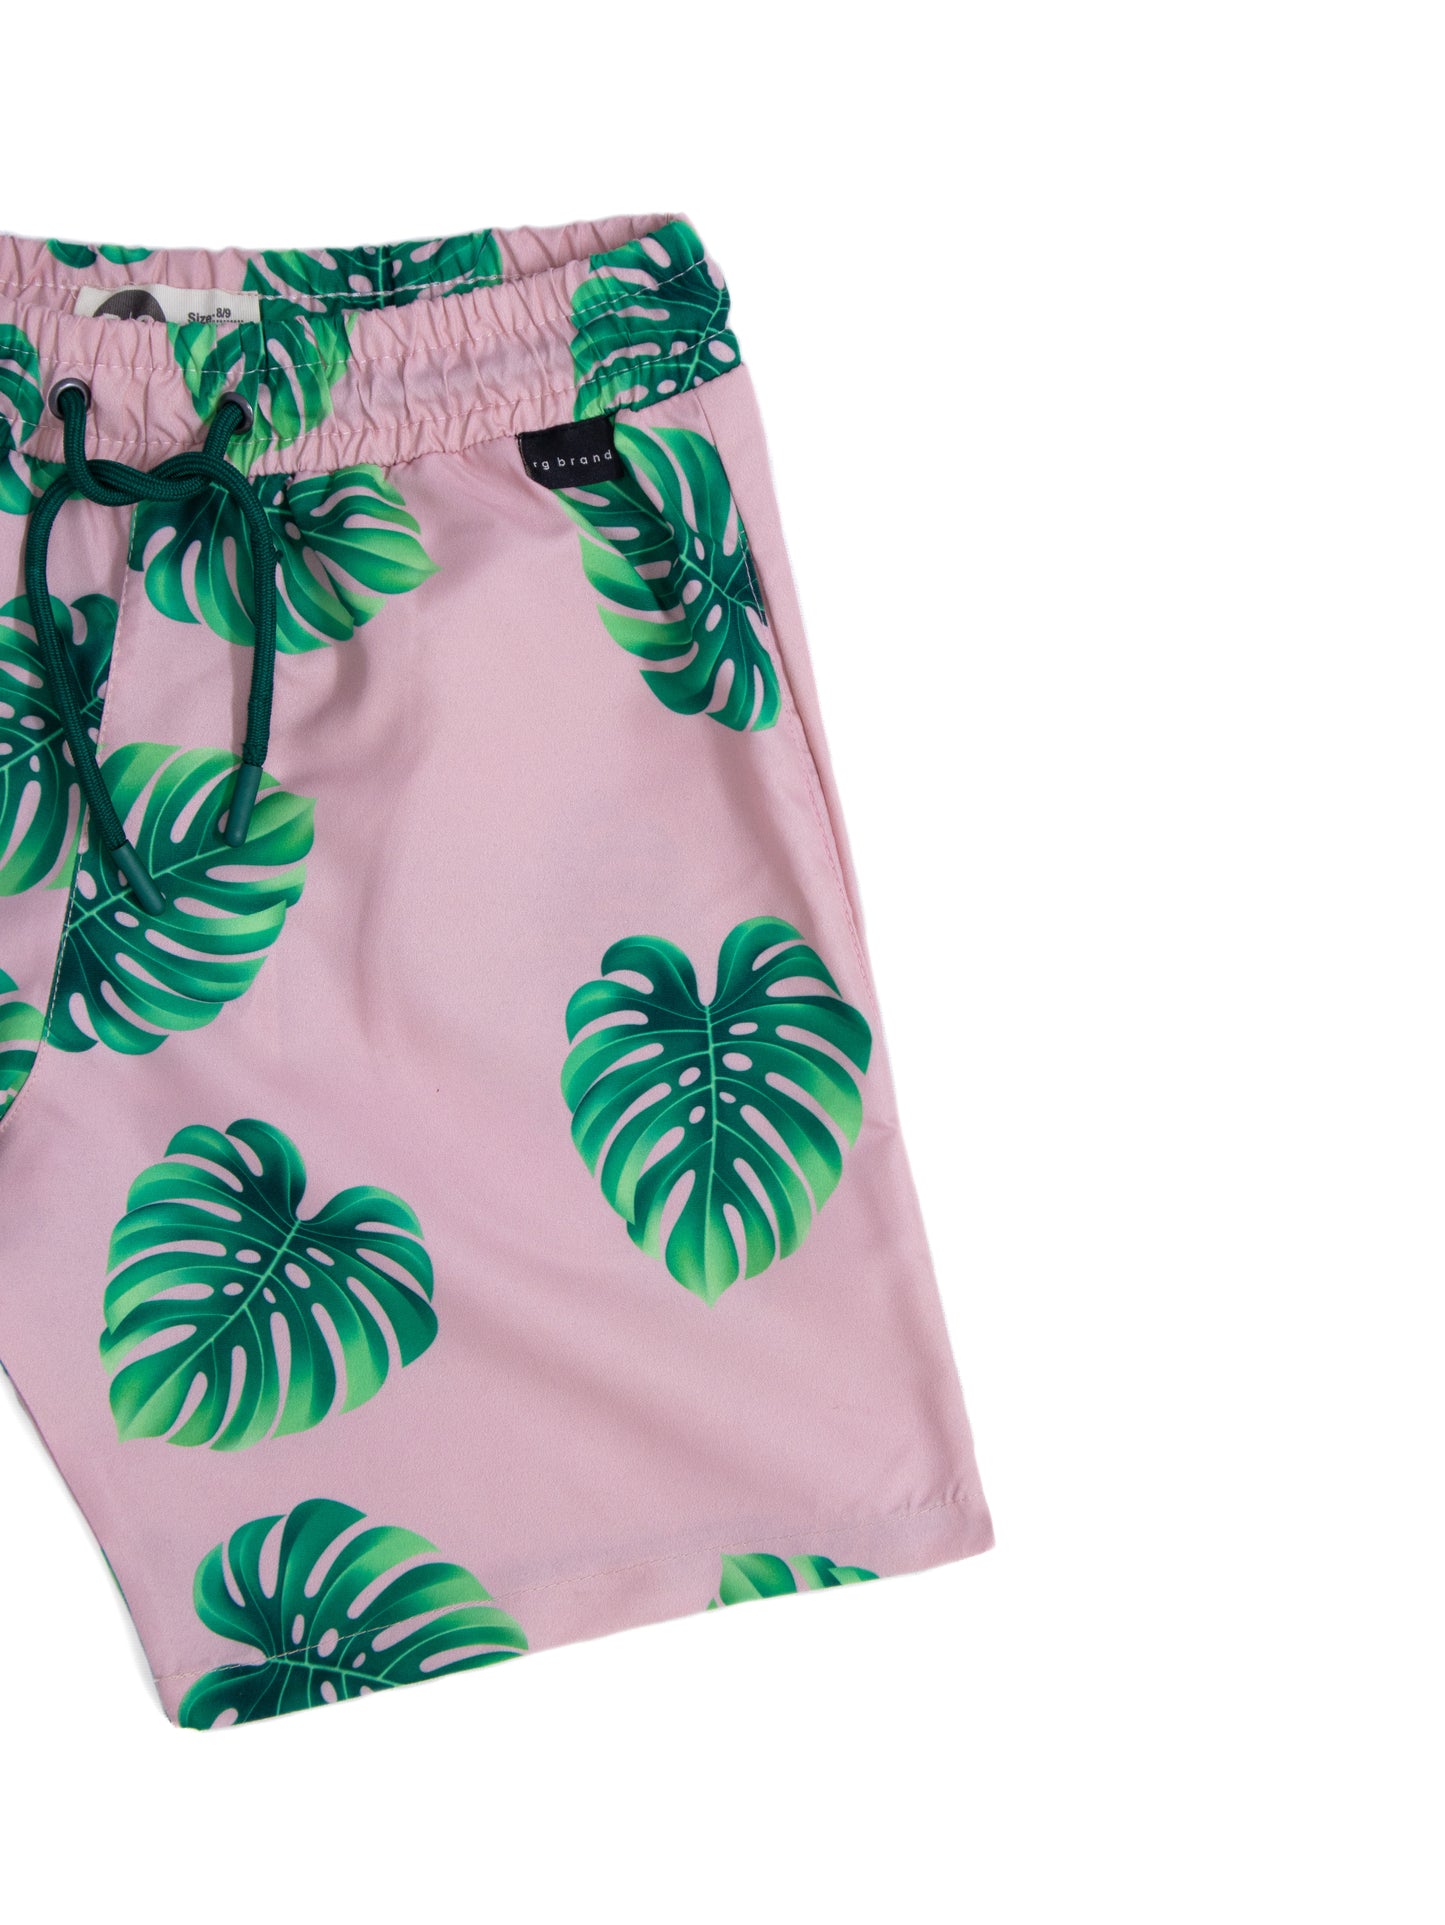 Children's Unisex Patterned Quick Drying Swim Shorts with Elastic Waist